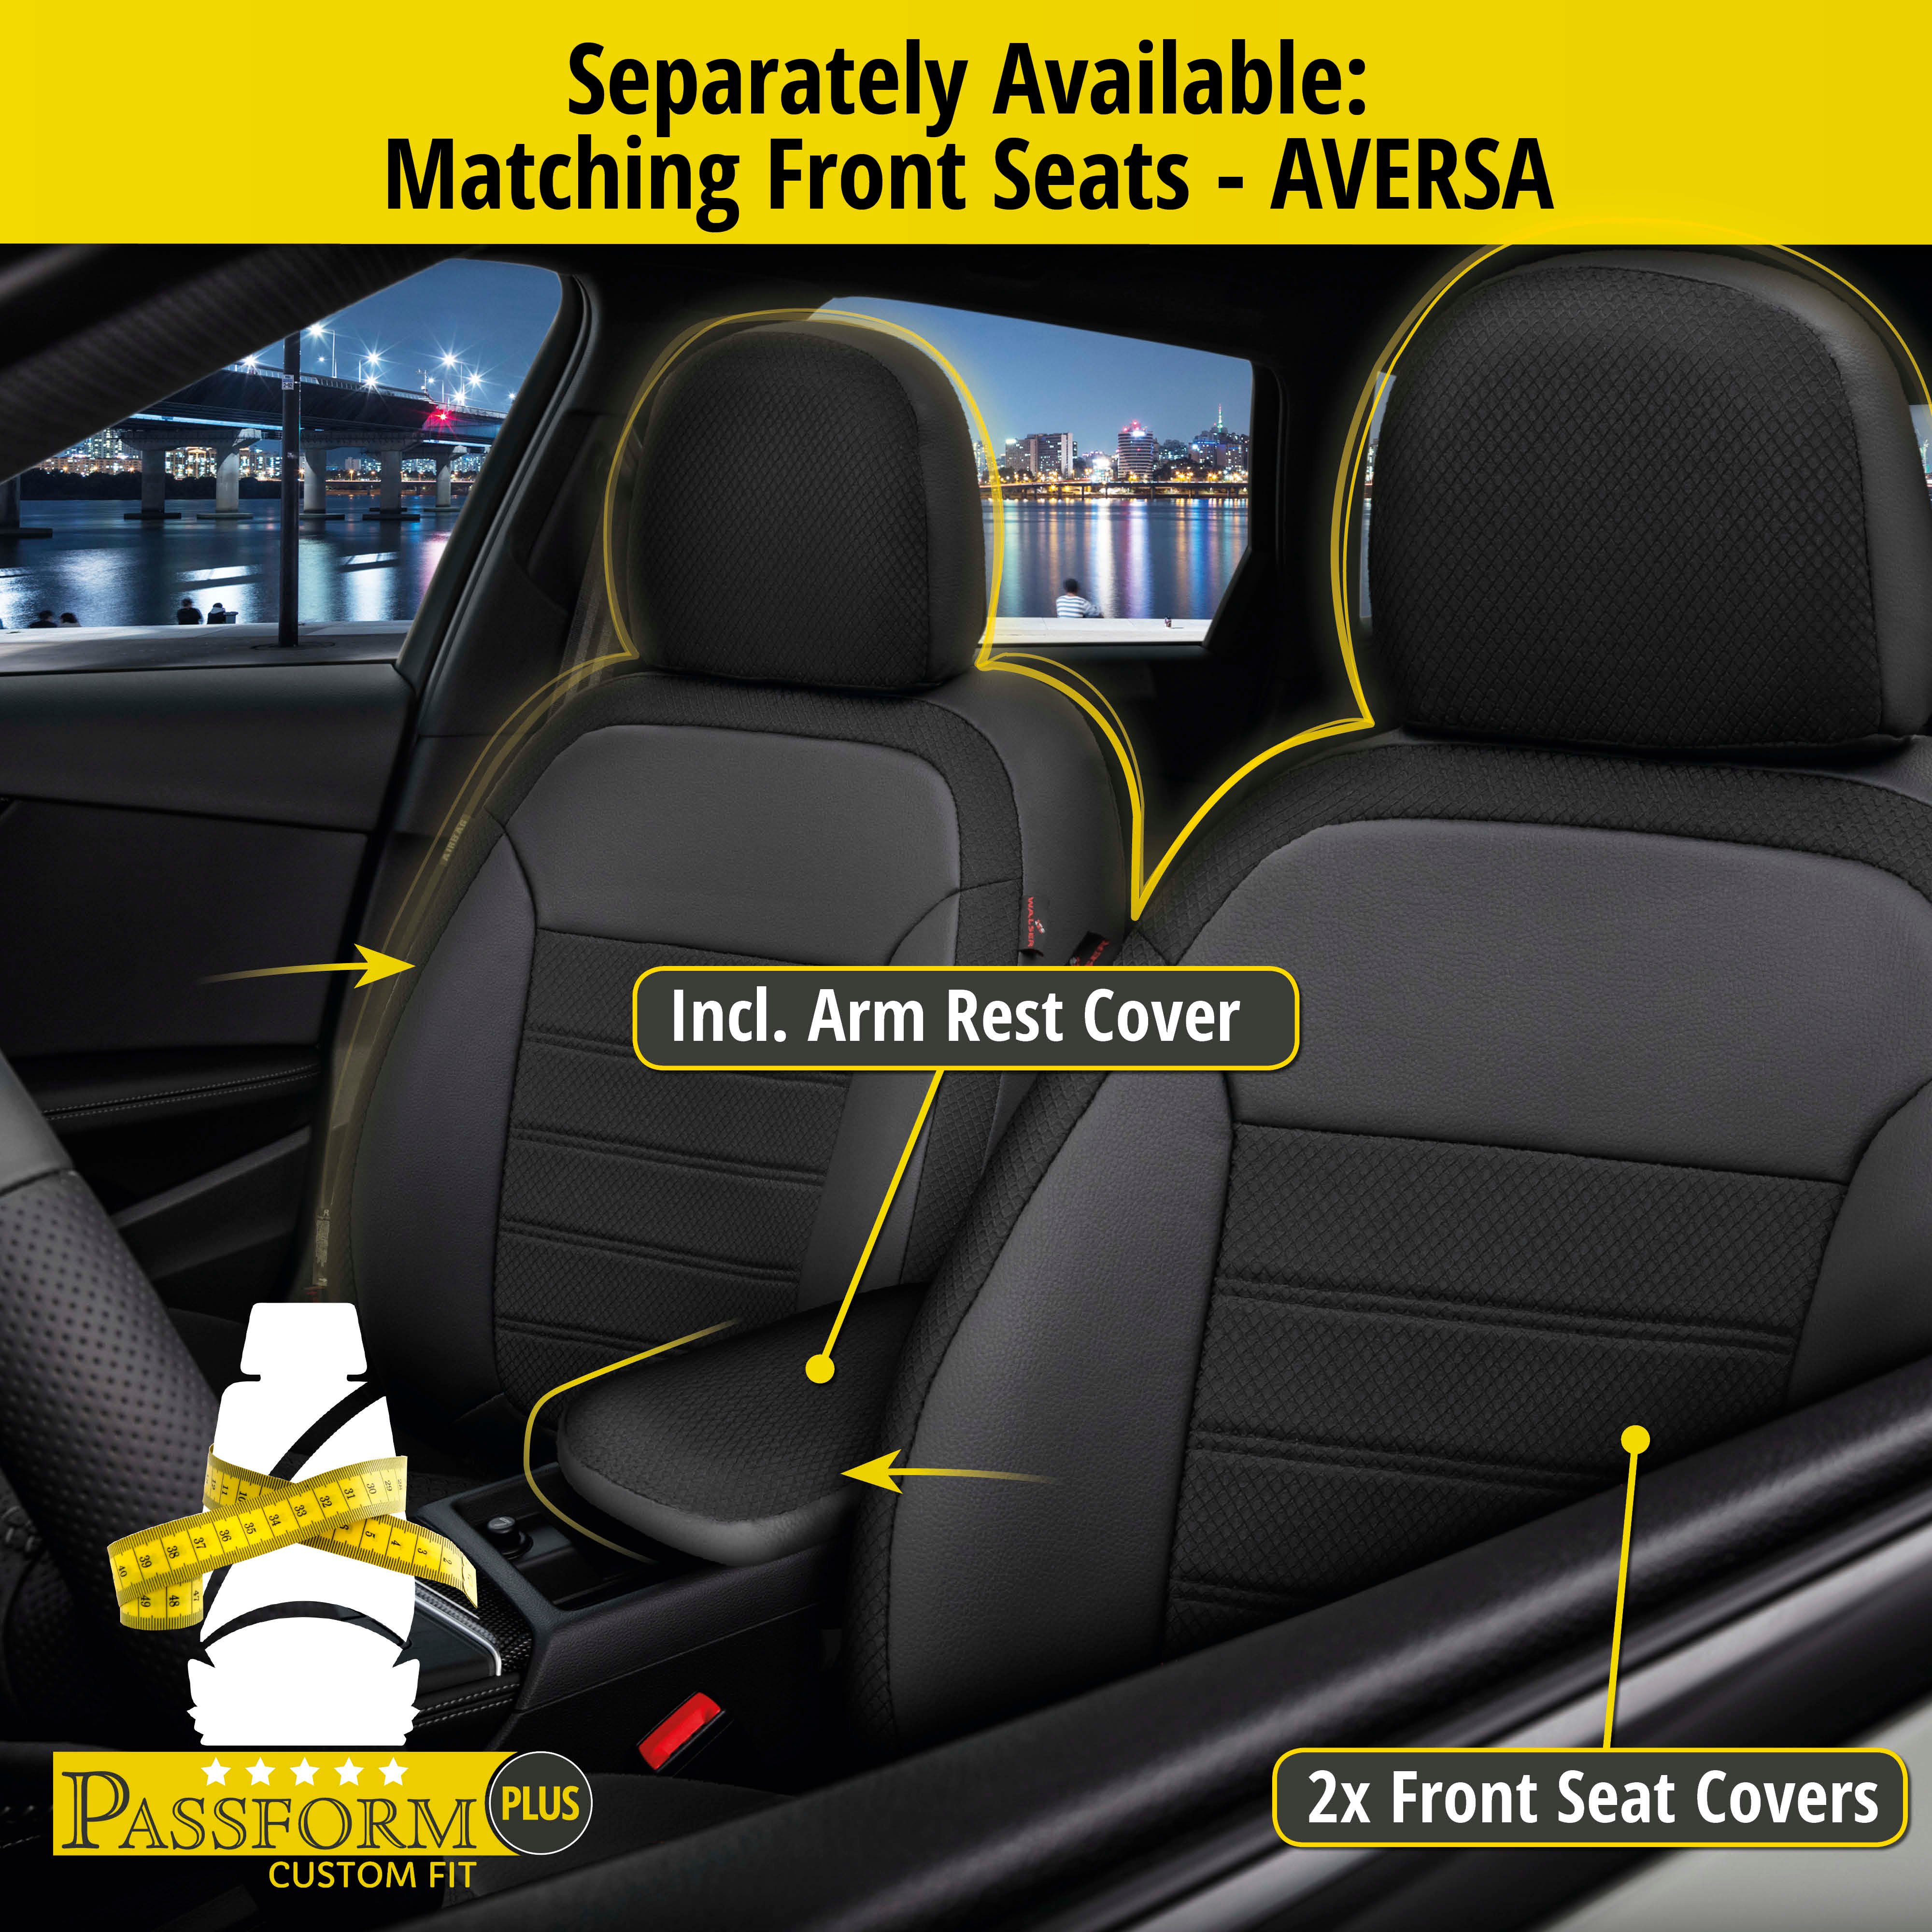 Seat Cover Aversa for Audi A4 Avant (8K5, B8) 11/2007-12/2015, 1 rear seat cover for sport seats